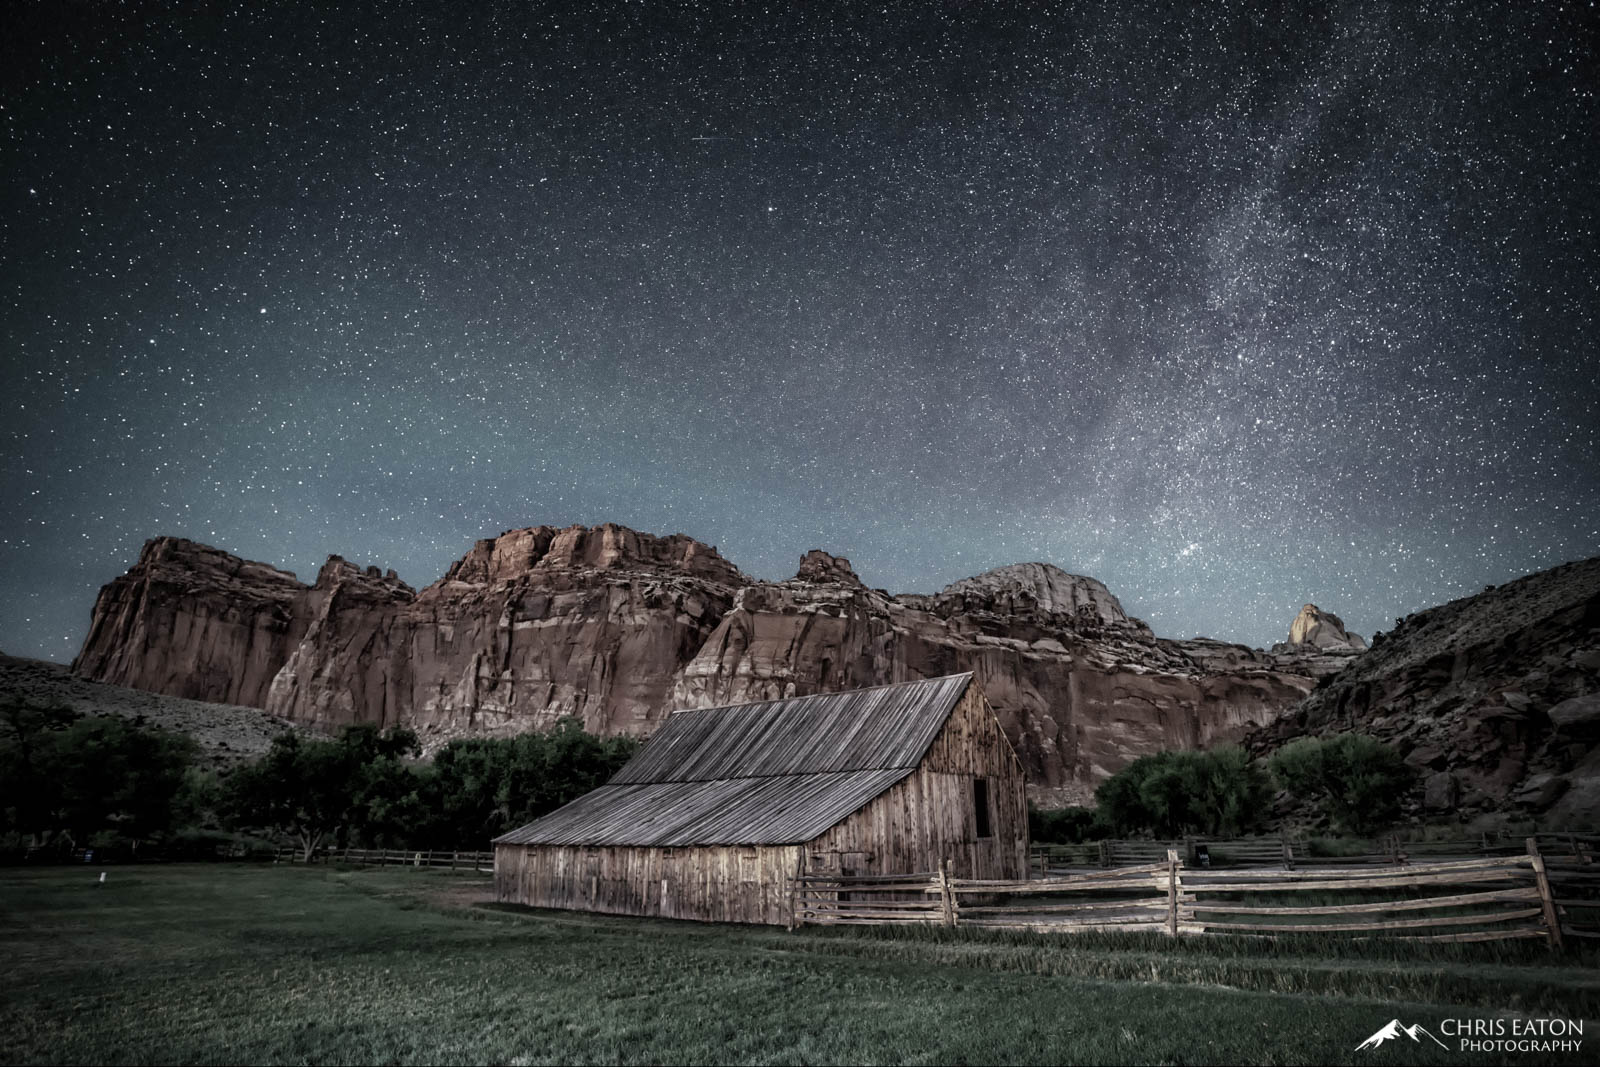 The old horse barn in the Fruita Historic District in Capitol Reef National Park is still in use today by the National Park Service...